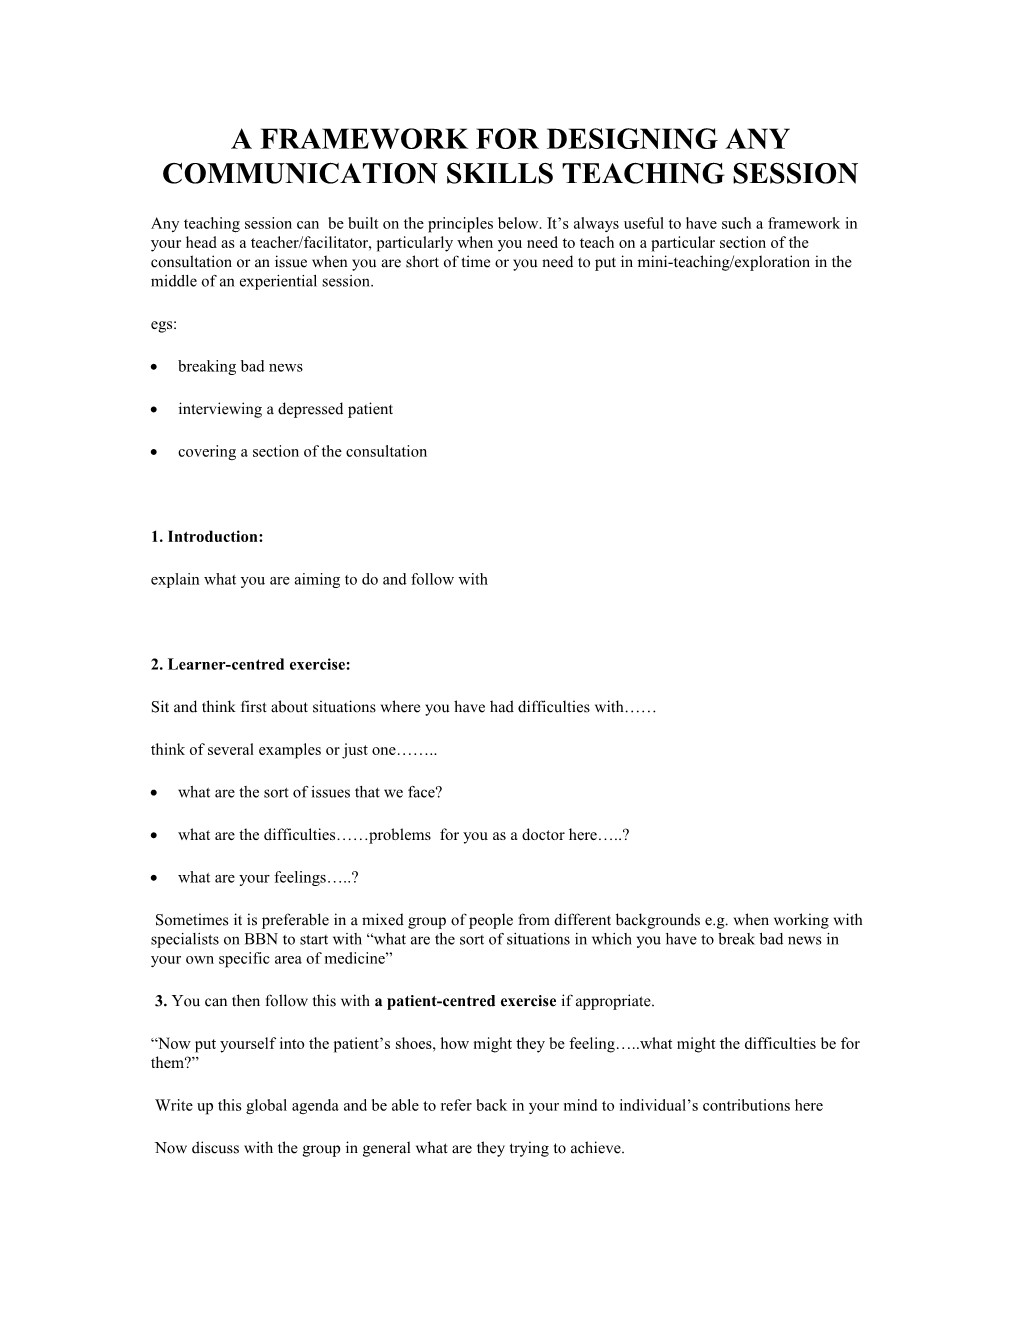 A Framework for Designing Any Communication Skills Teaching Session